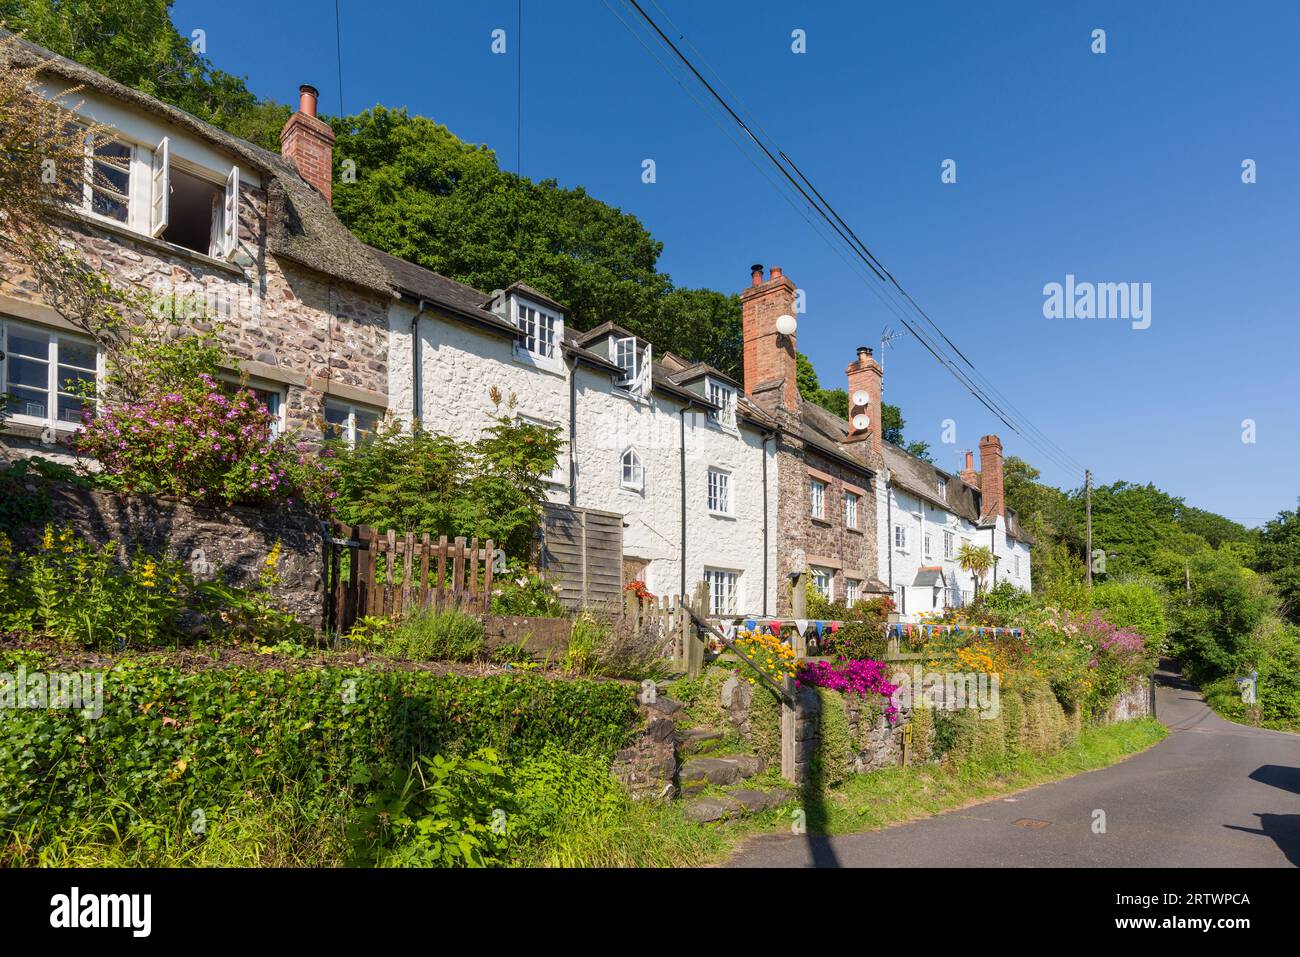 Terraced cottages in the coastal settlement of Porlock Weir in the Exmoor National Park, Somerset, England. Stock Photo